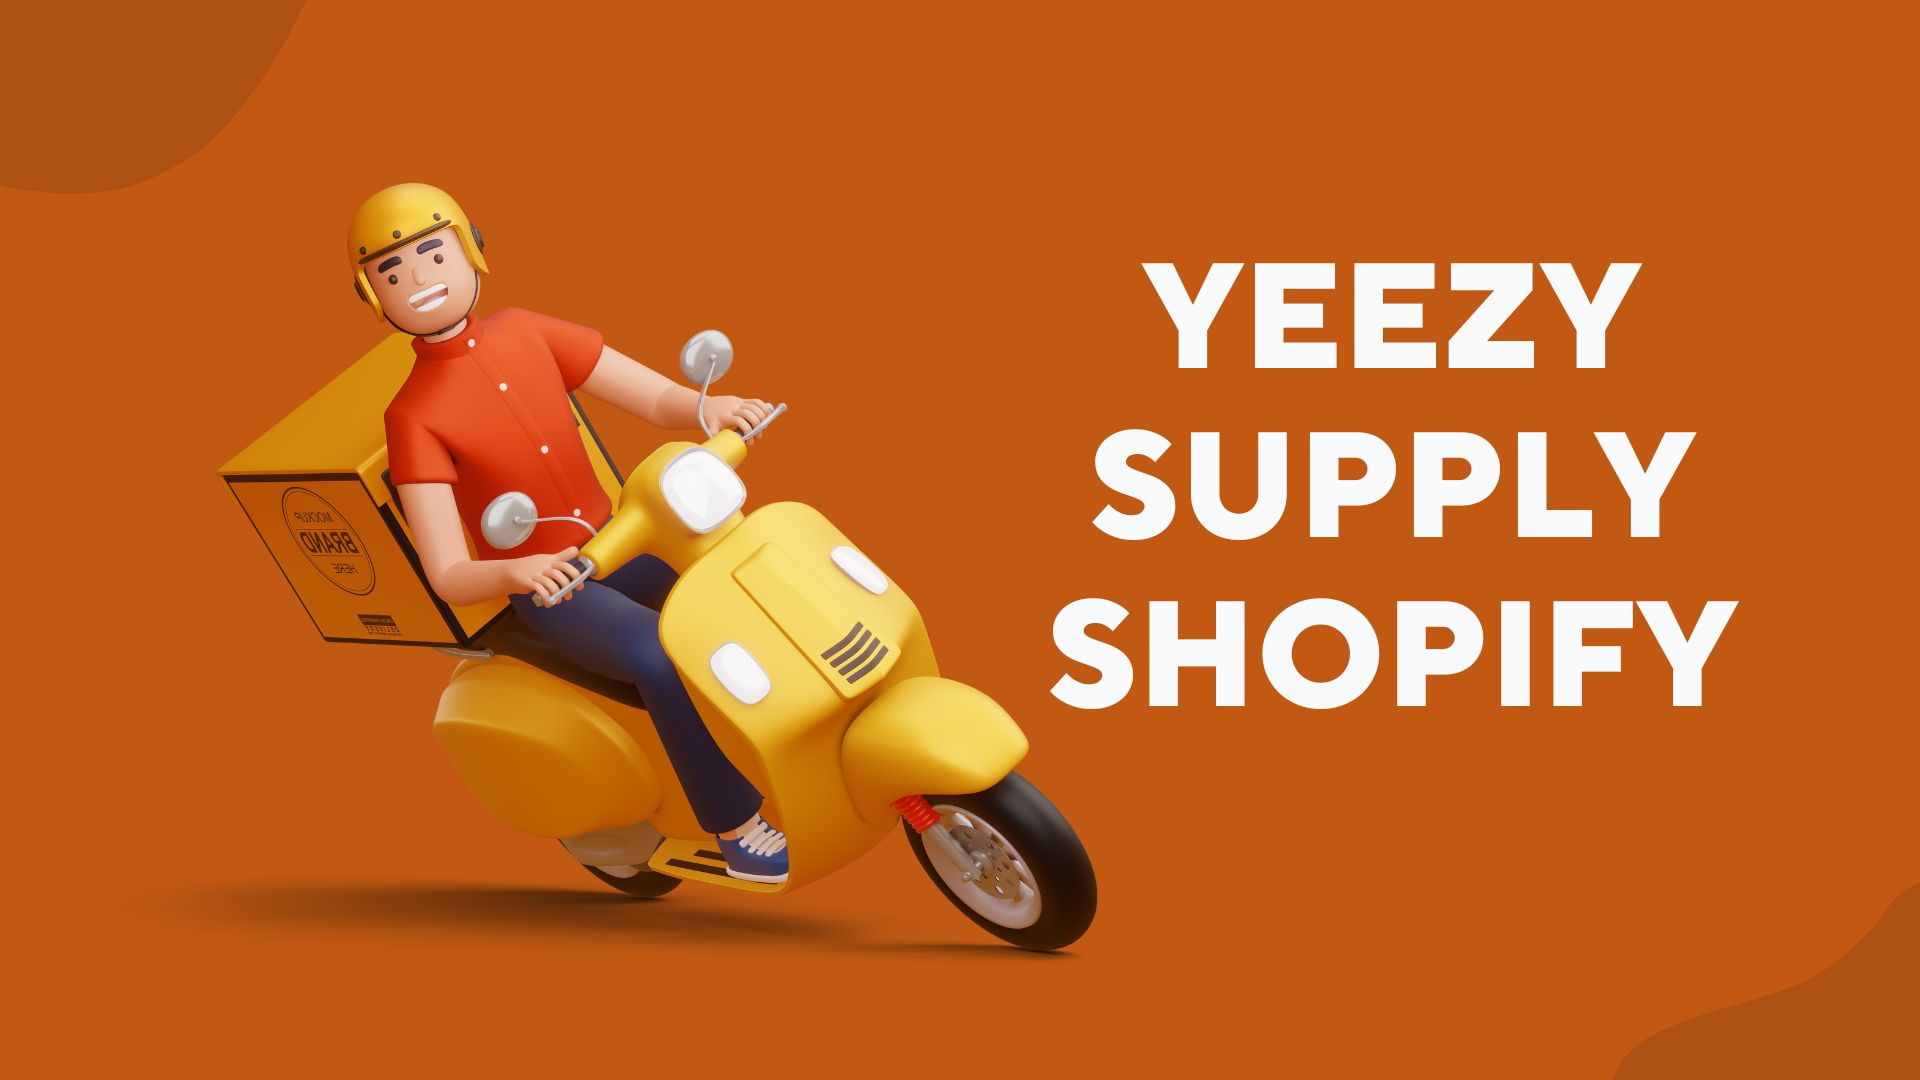 Is Yeezy Supply Shopify